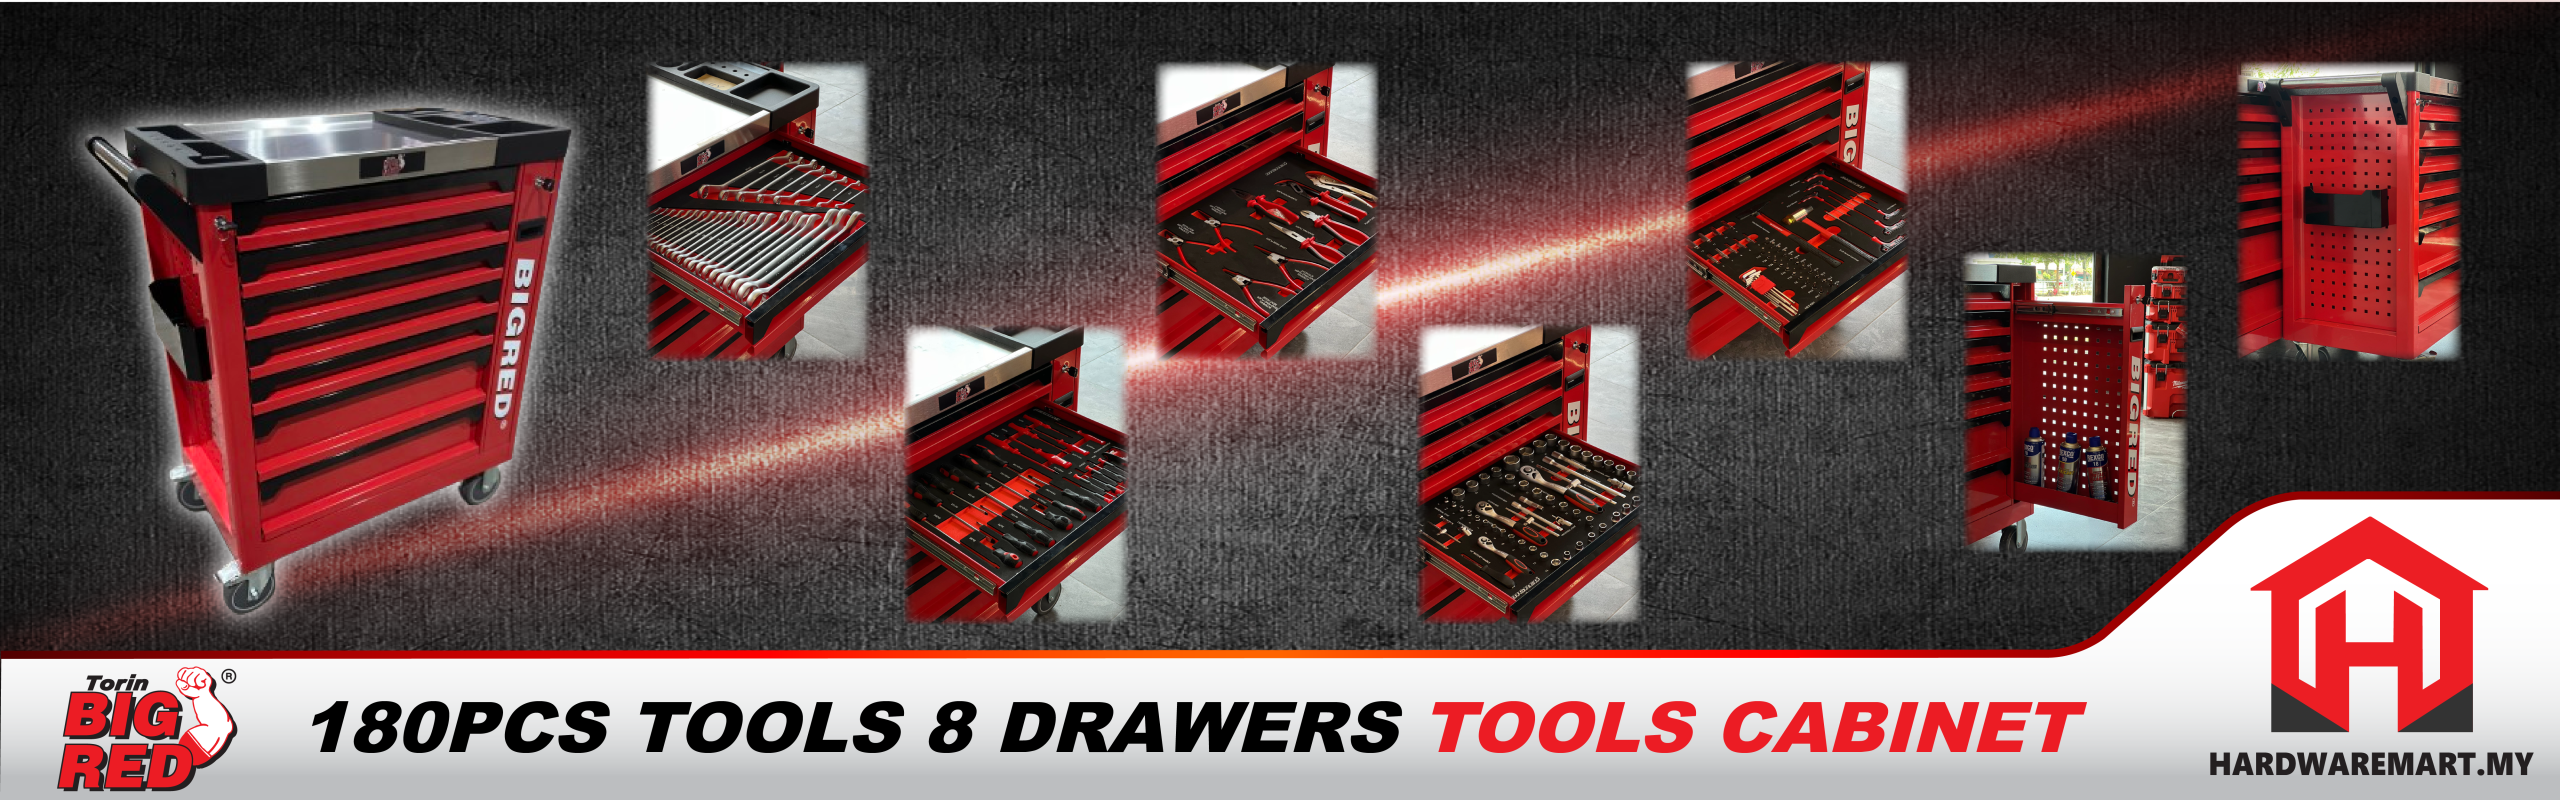 Maximize Your Workshop Efficiency with the BIGRED 8 Drawer 180PCS Tools Cabinet